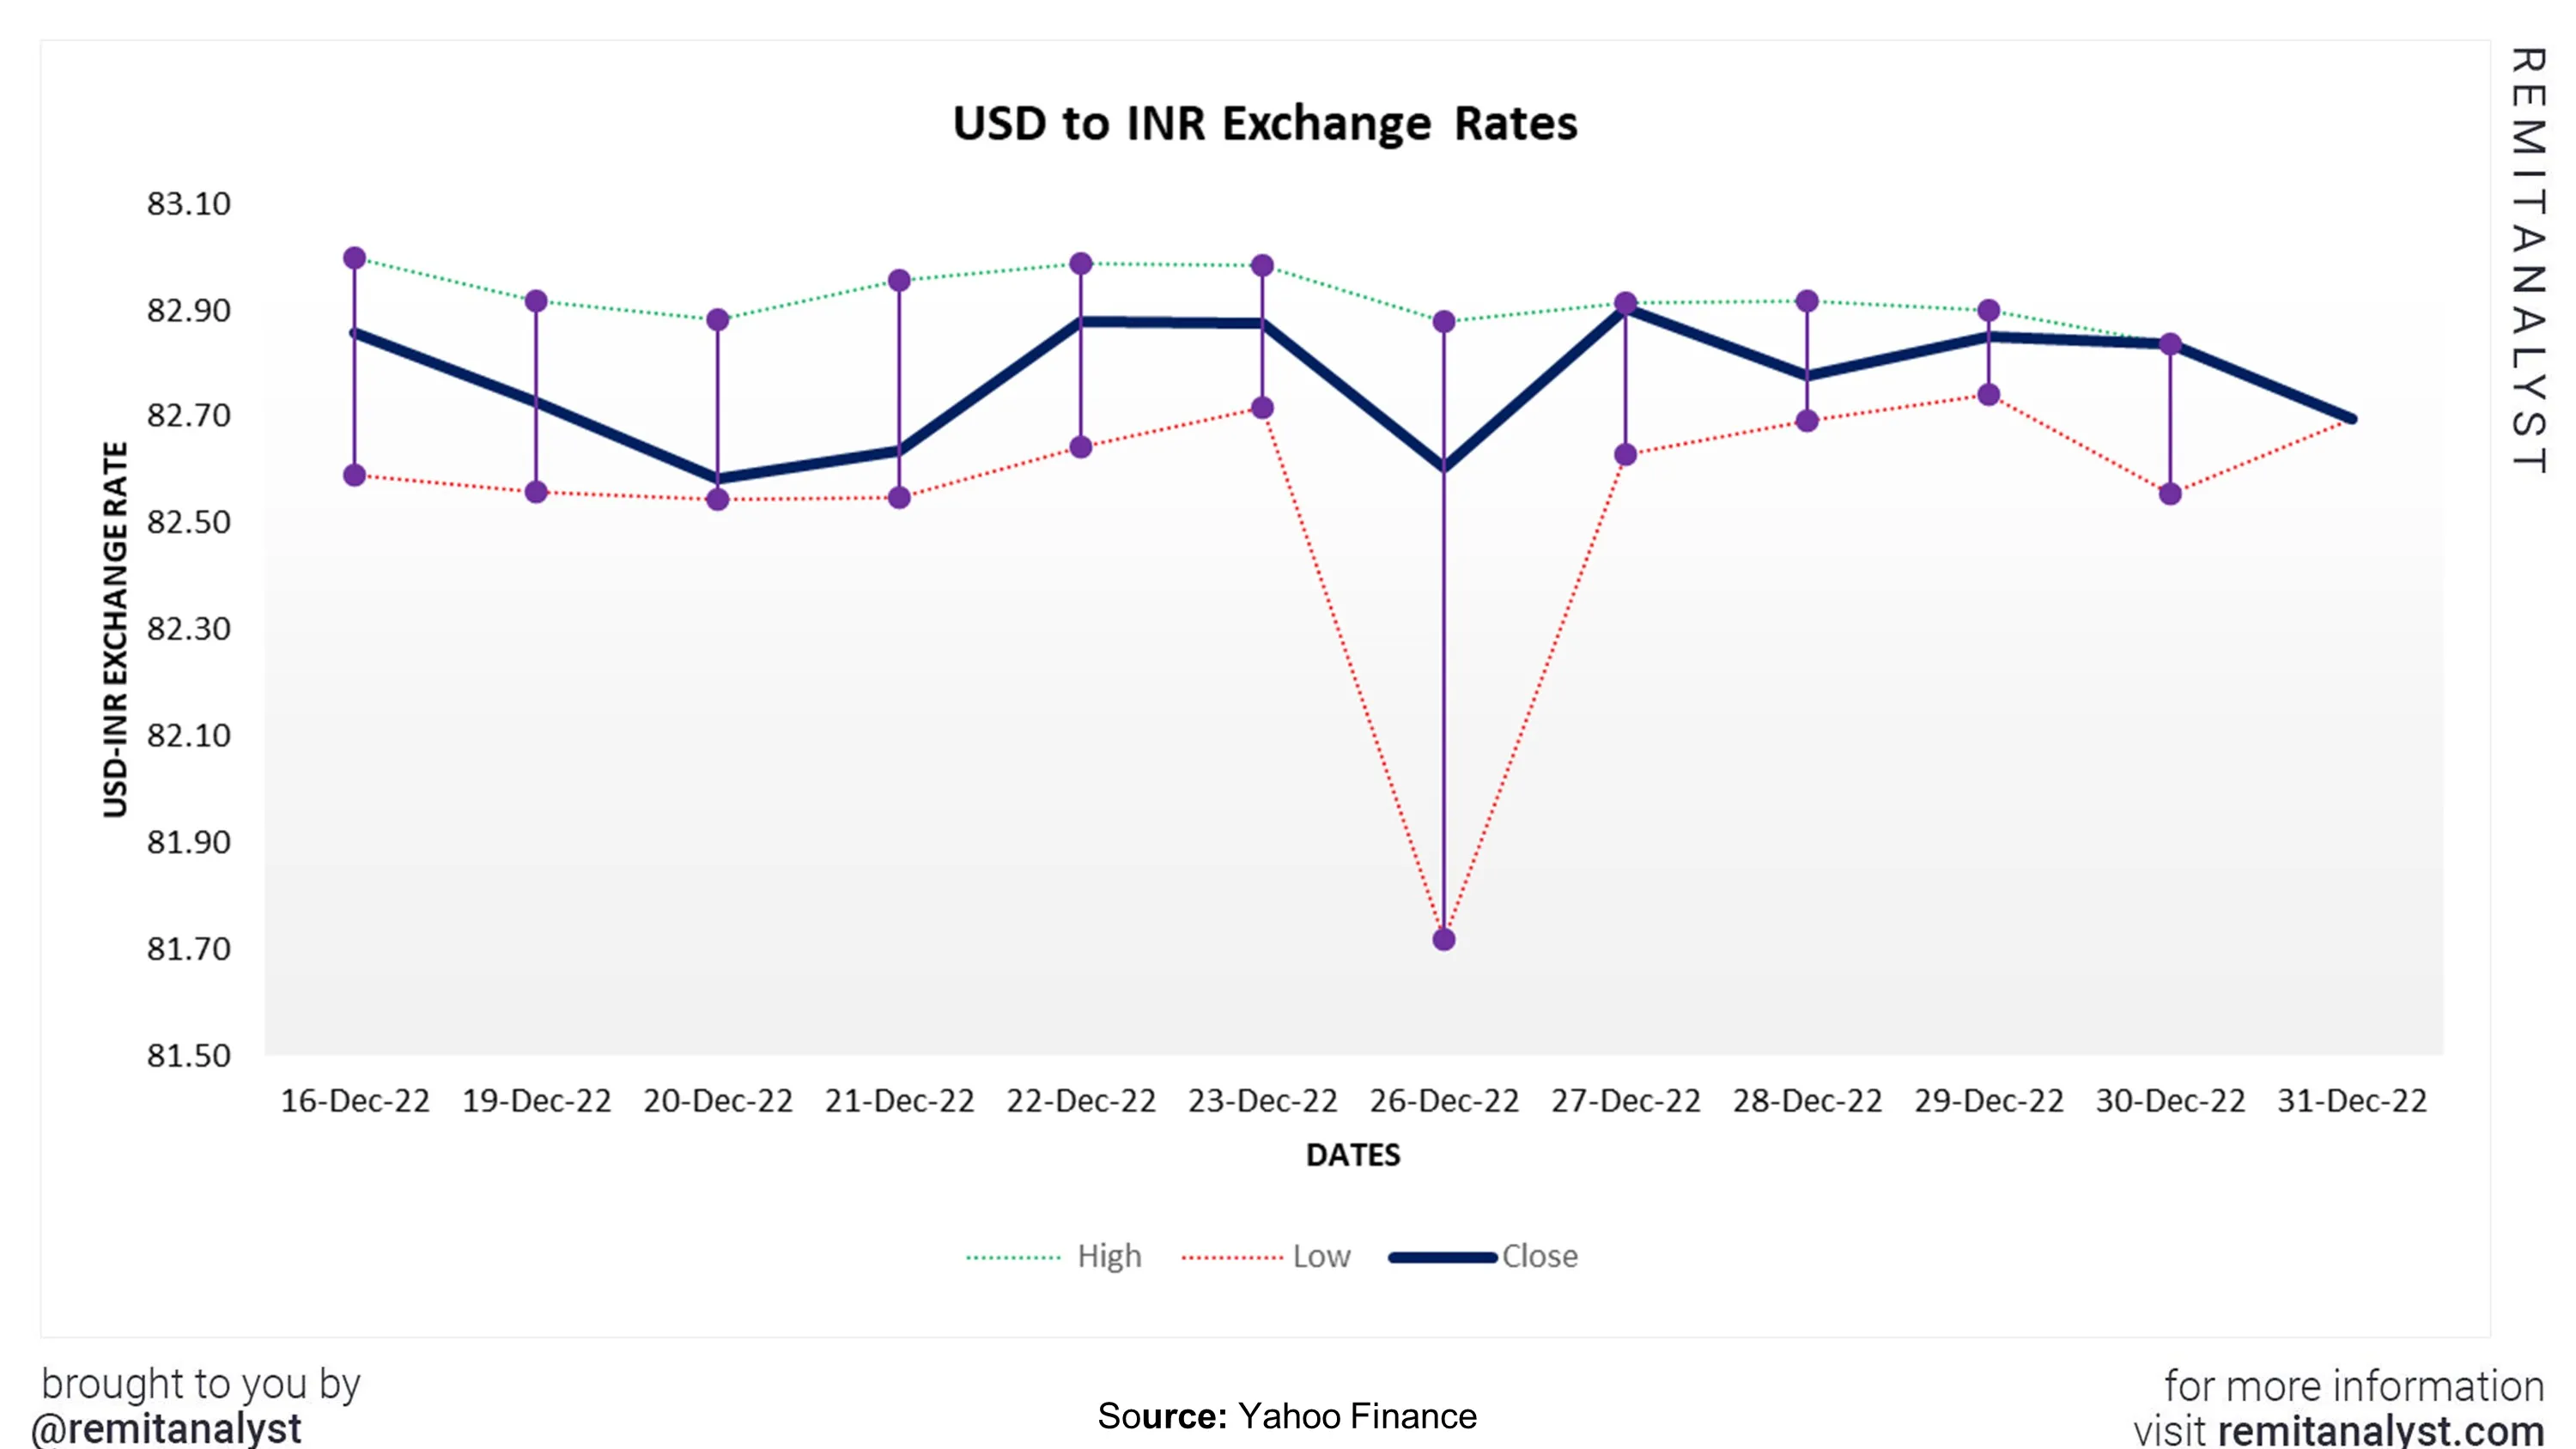 usd-to-inr-exchange-rate-from-16-dec-2022-to-31-dec-2022